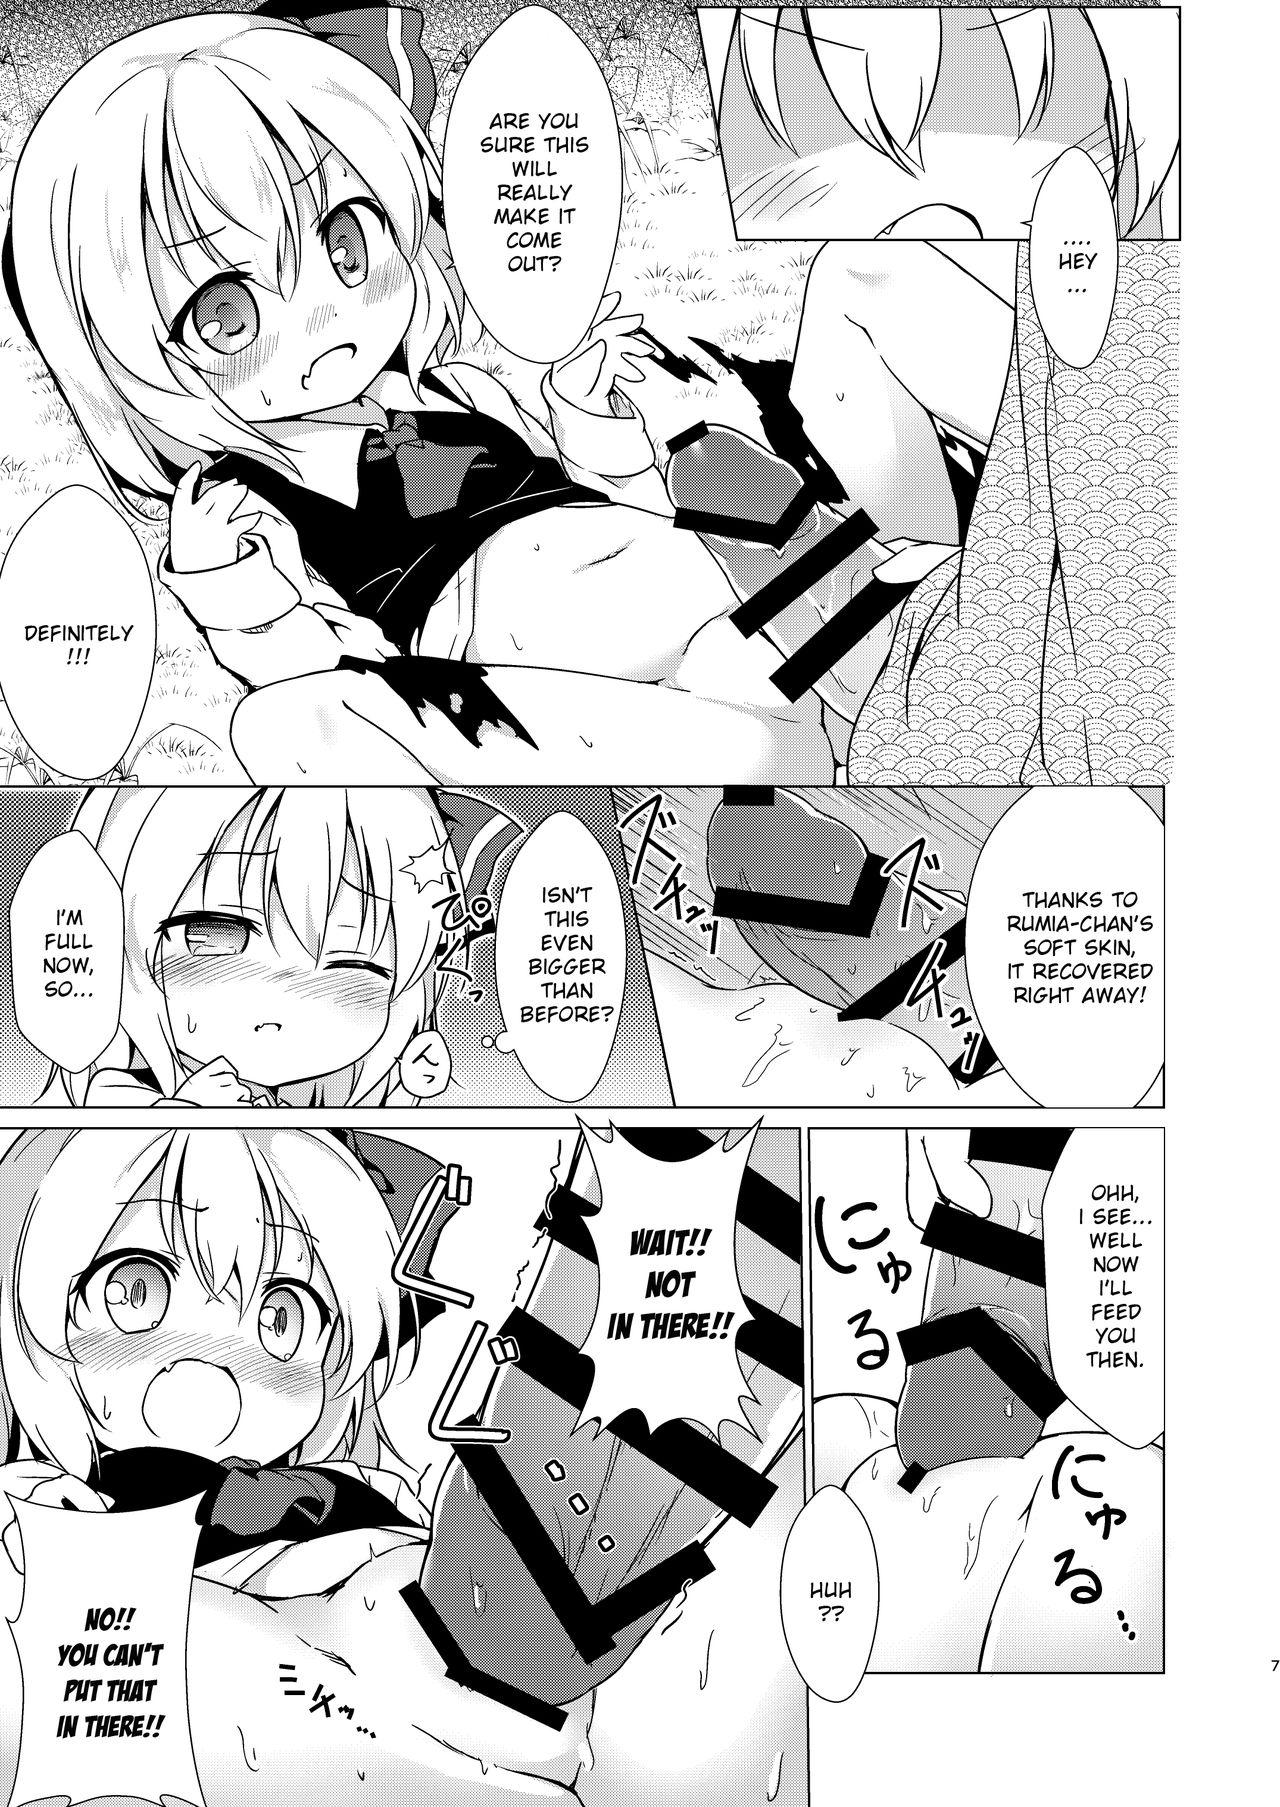 Bus Kin no Tamago - Touhou project Analsex - Page 6